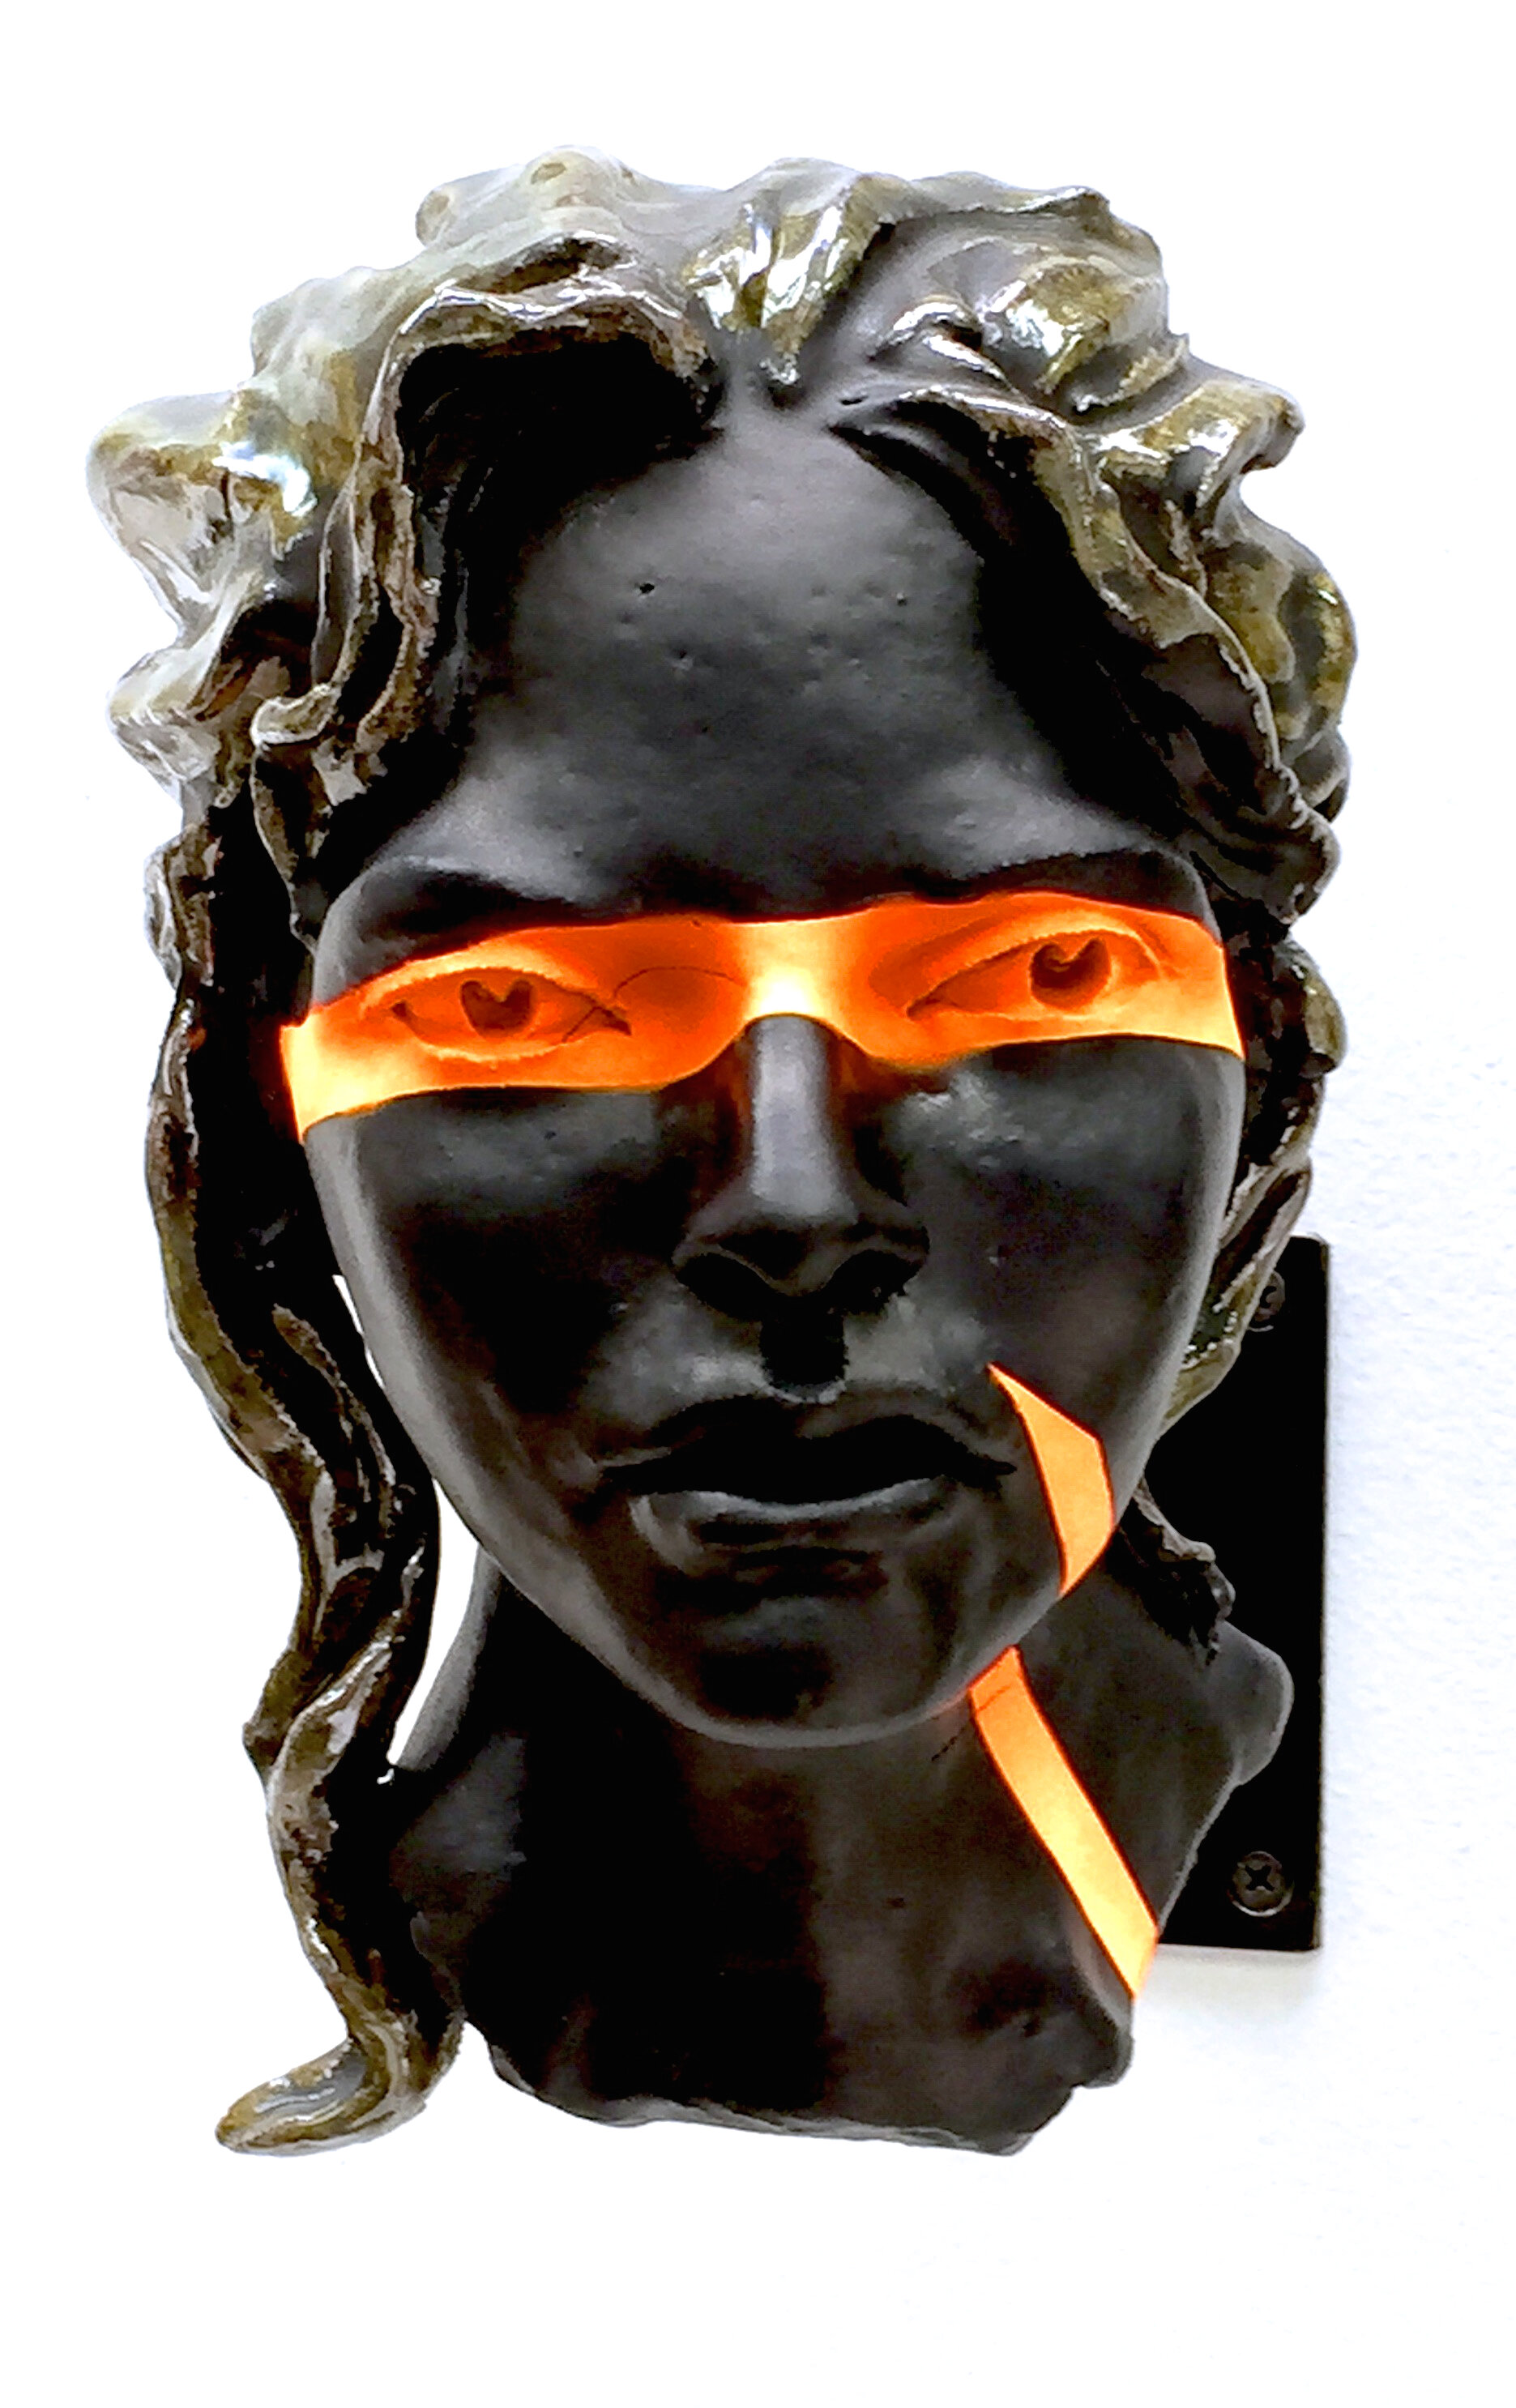  Womans Head with Fluorescent Orange Eyes, 10”H, high-fire stoneware, patina. 